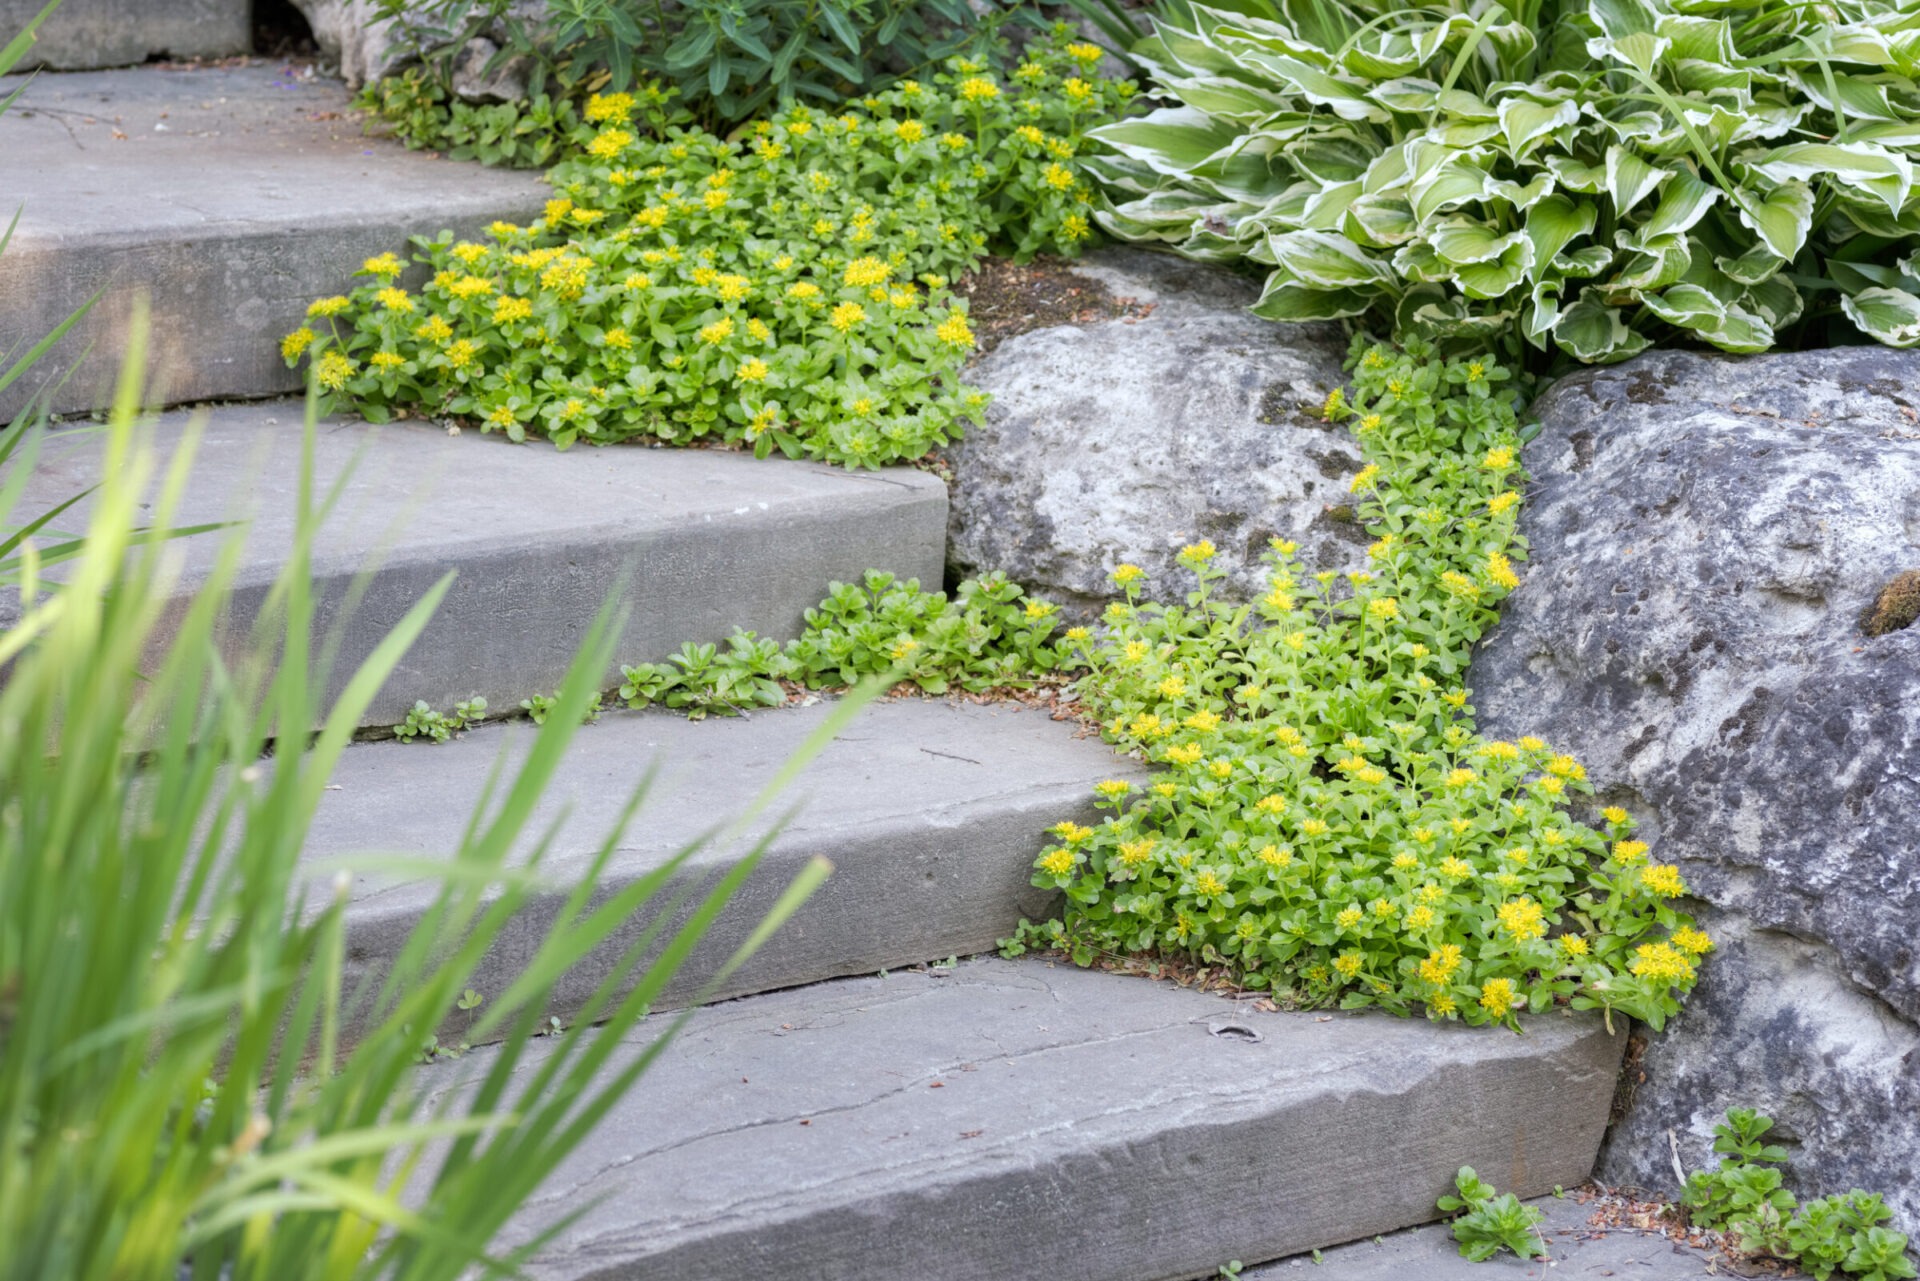 A garden path with concrete steps is interspersed with lush greenery and bright yellow flowers. Larger rocks and variegated hosta plants frame the scene.